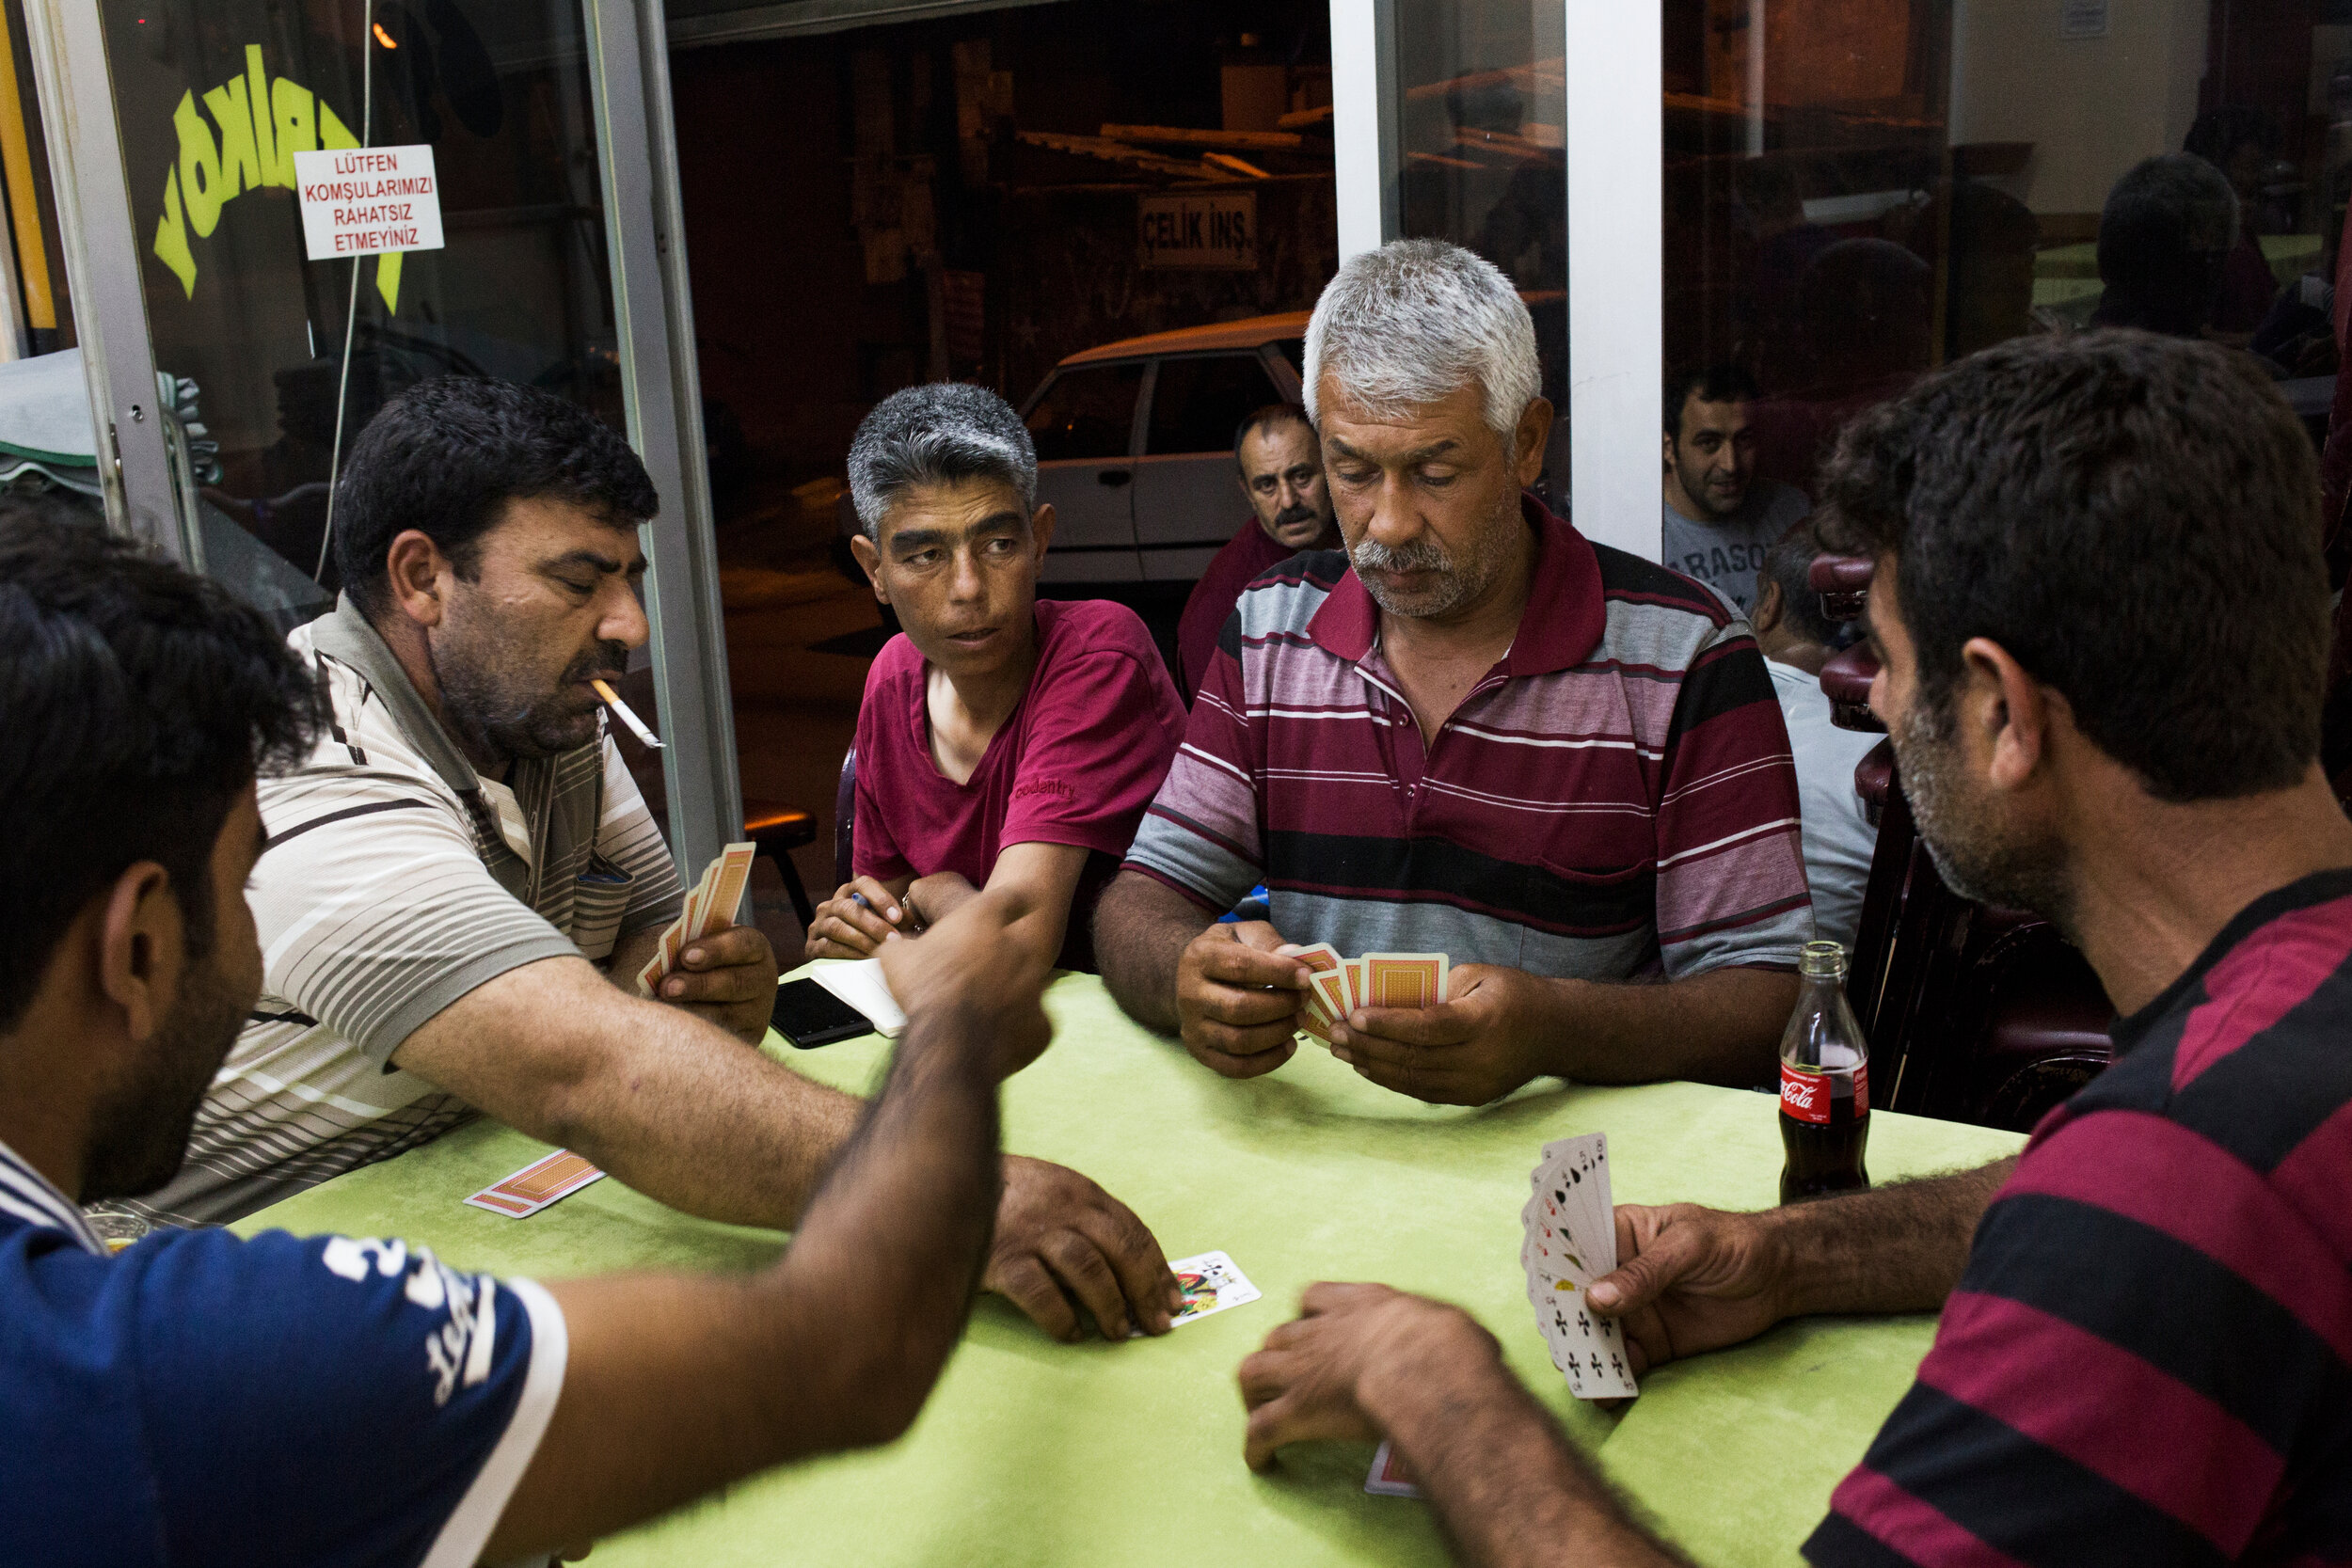  Men play cards at a kahvehane, a traditional Turkish coffee shop frequented by men, in Istanbul, Turkey. 